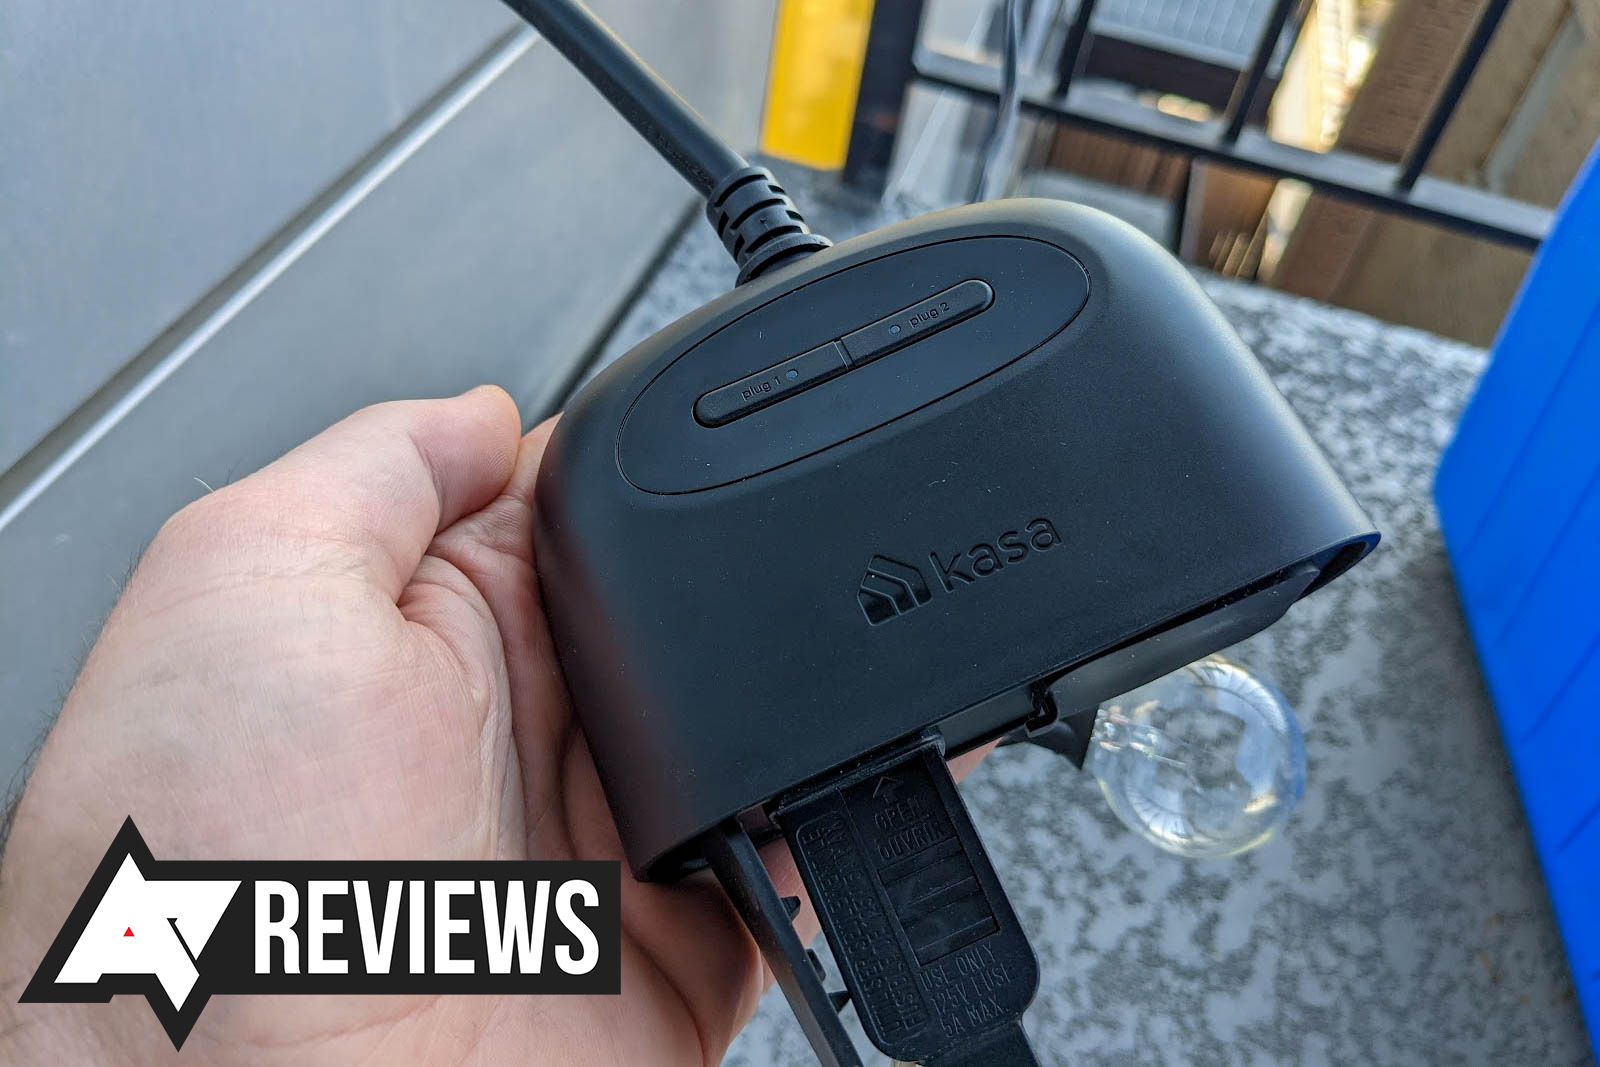 Kasa Outdoor Smart Plug (EP40) review: A worthy addition to any smart home